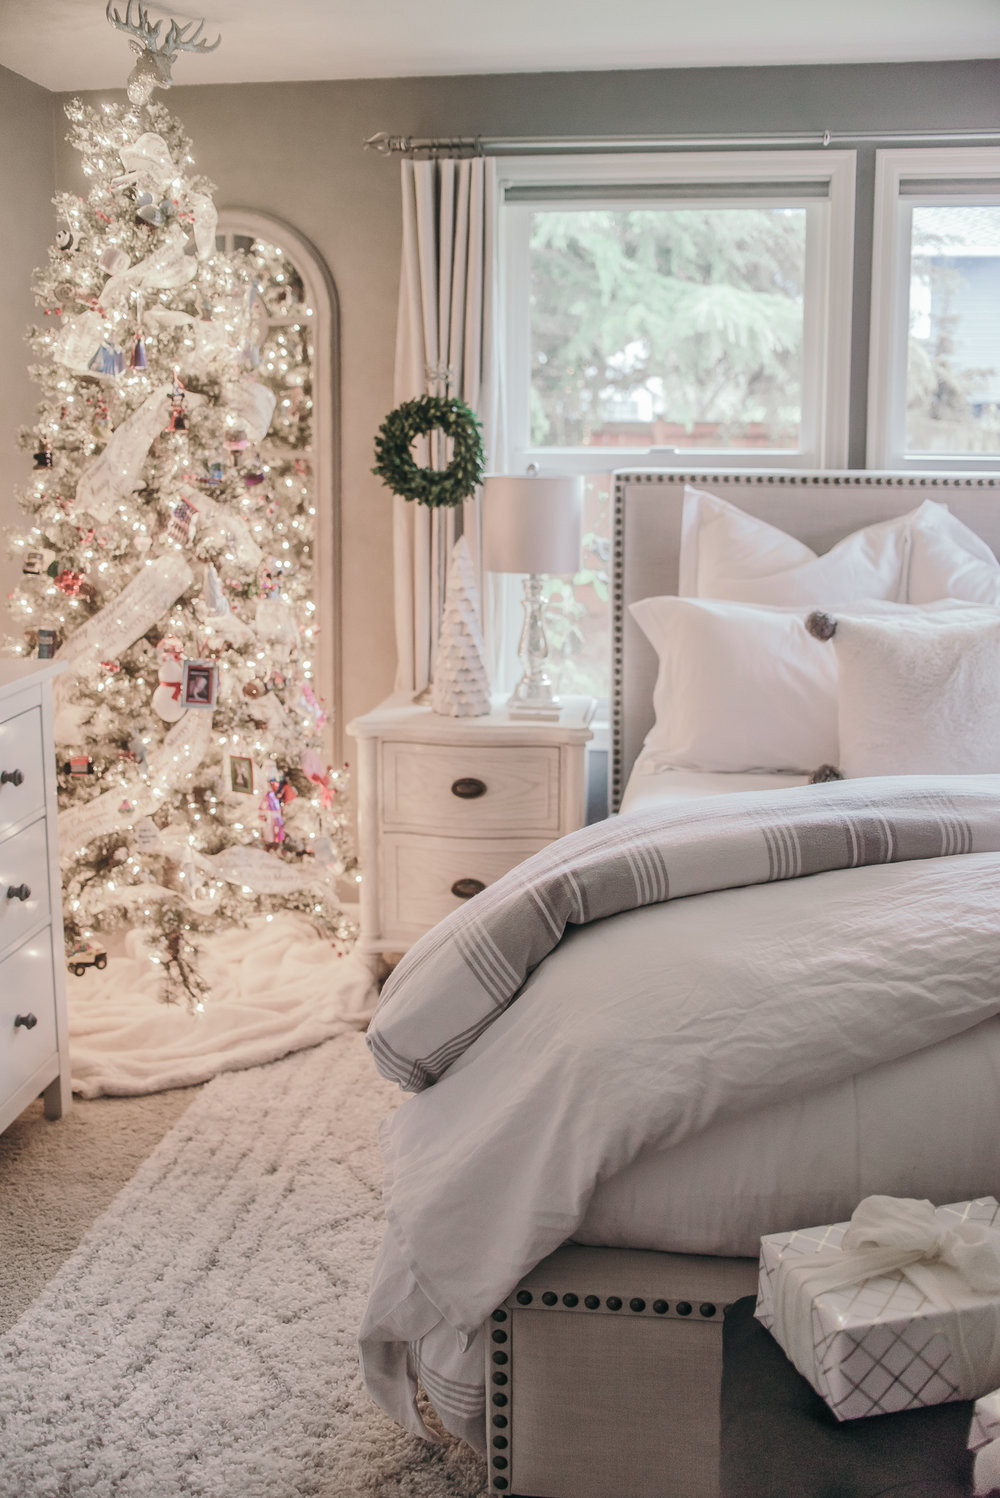 Christmas Decorations Bedroom
 Holiday Home Tour Christmas Decor Ideas — HOUSE OF FIVE